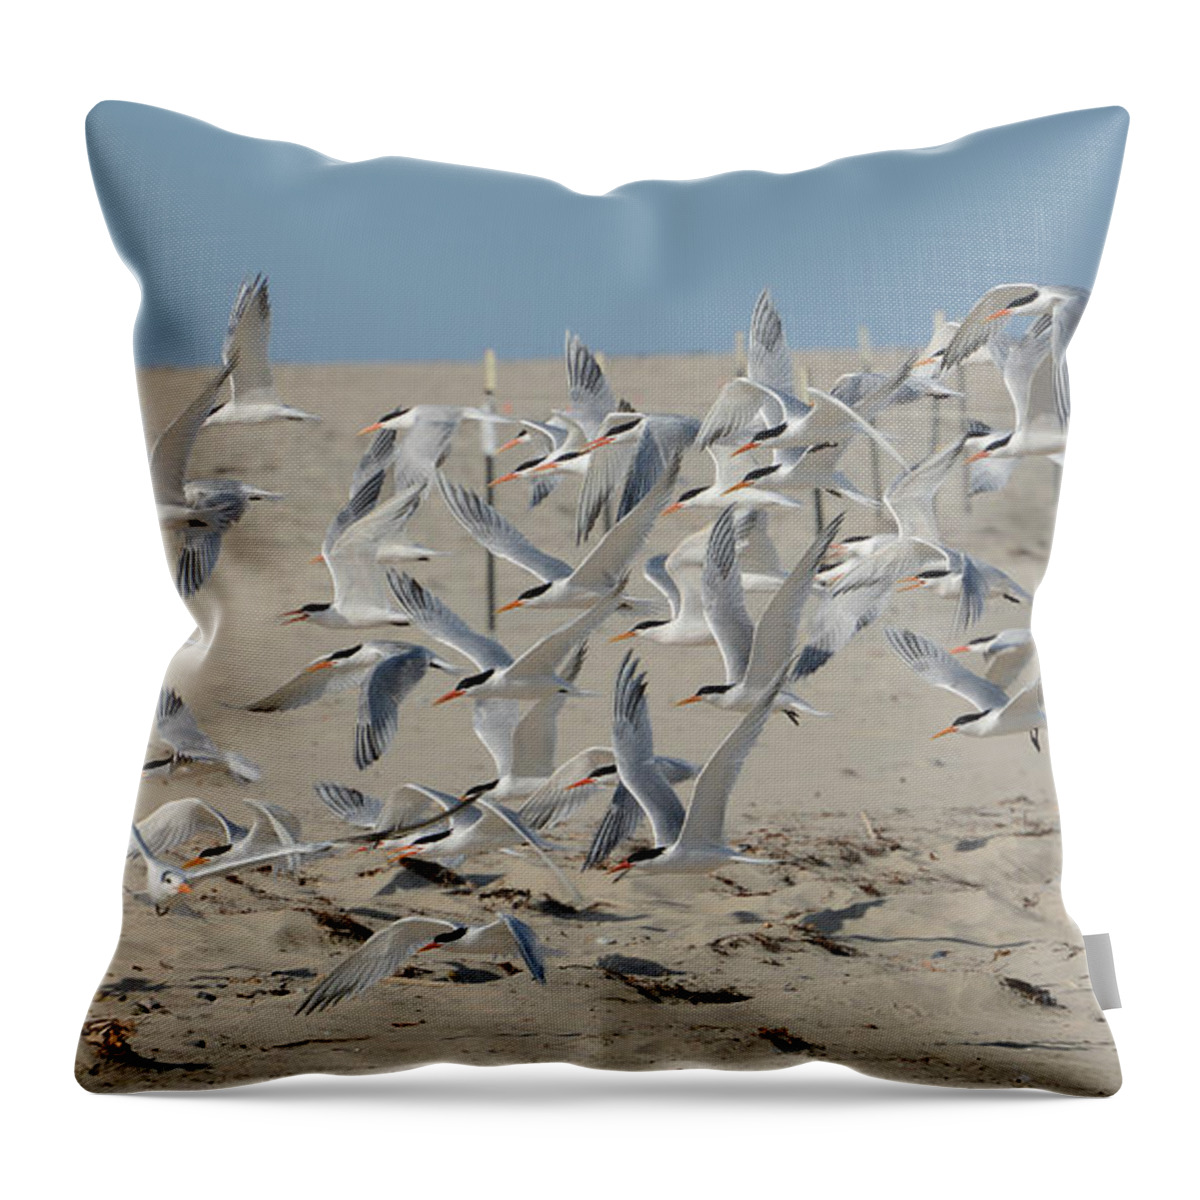 Terns Throw Pillow featuring the photograph Flight Of The Terns by Fraida Gutovich